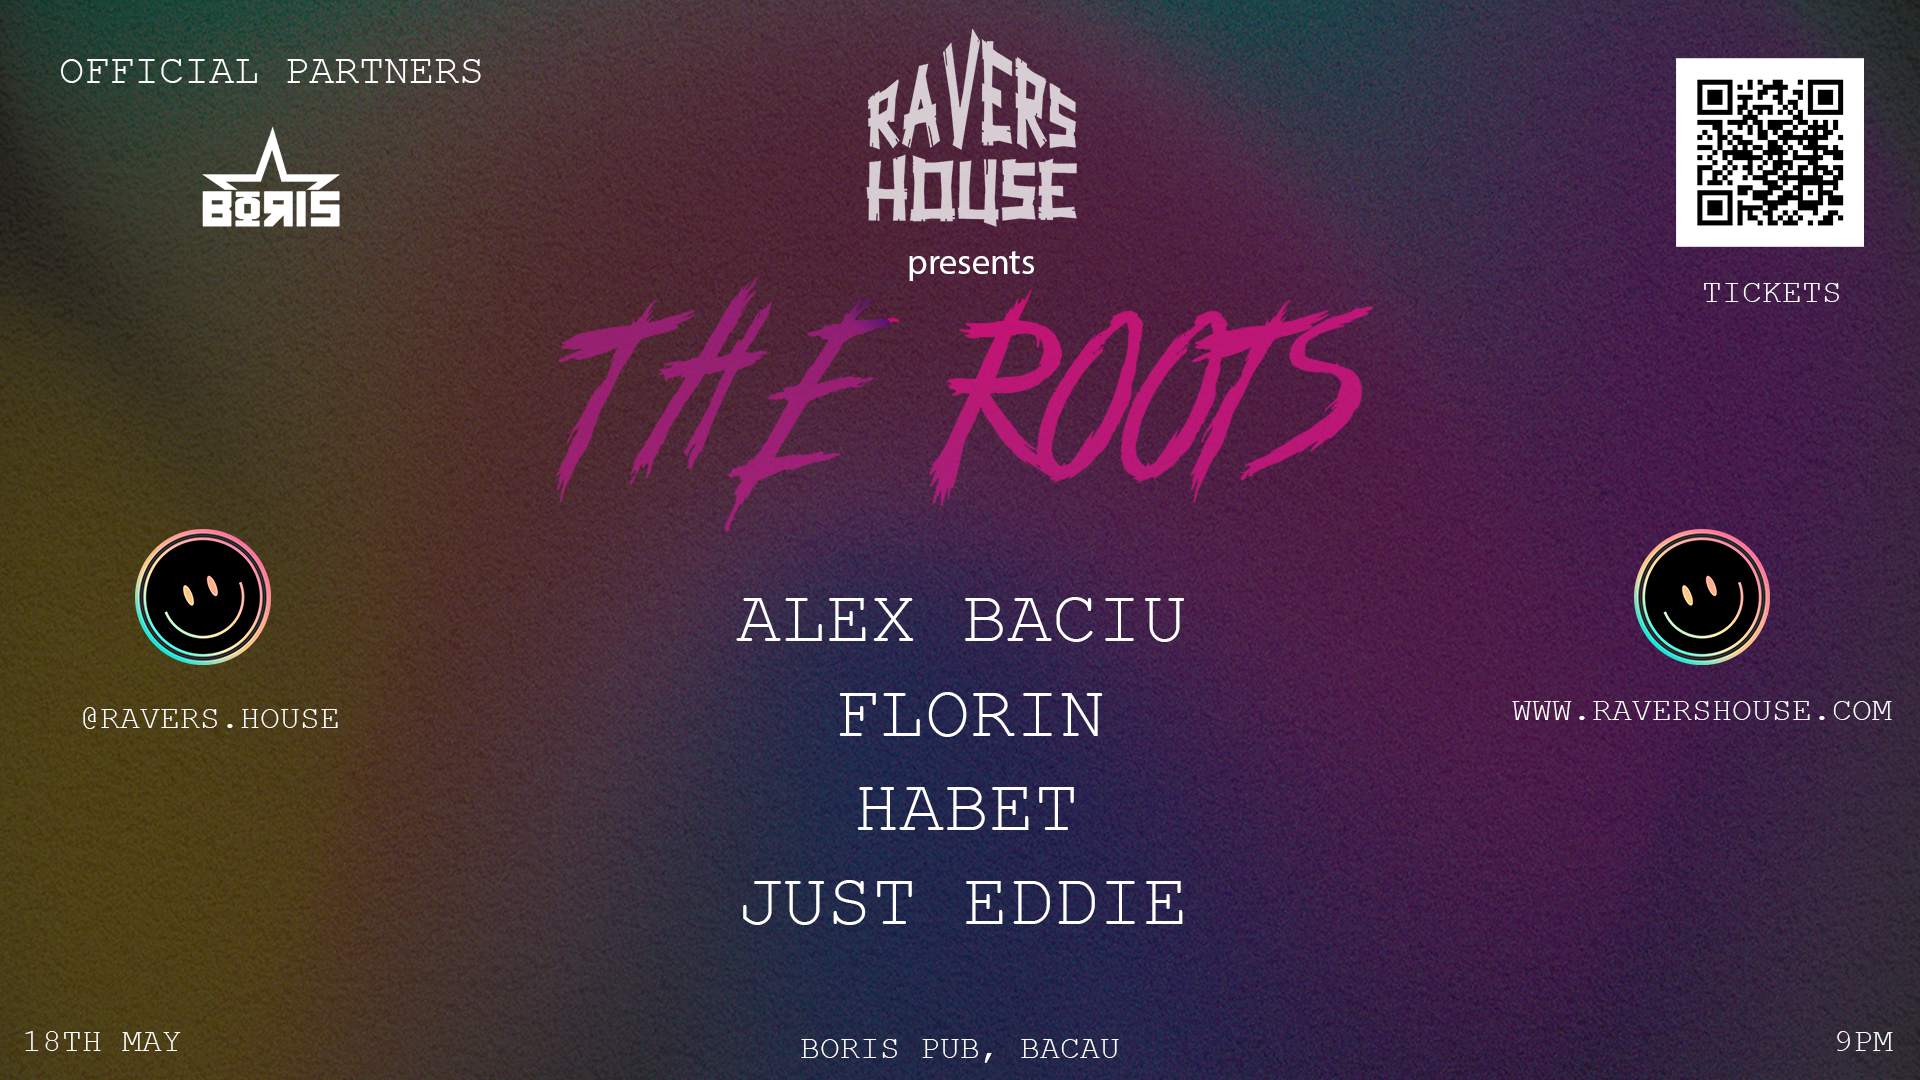 Ravers House presents 'The Roots' - フライヤー表